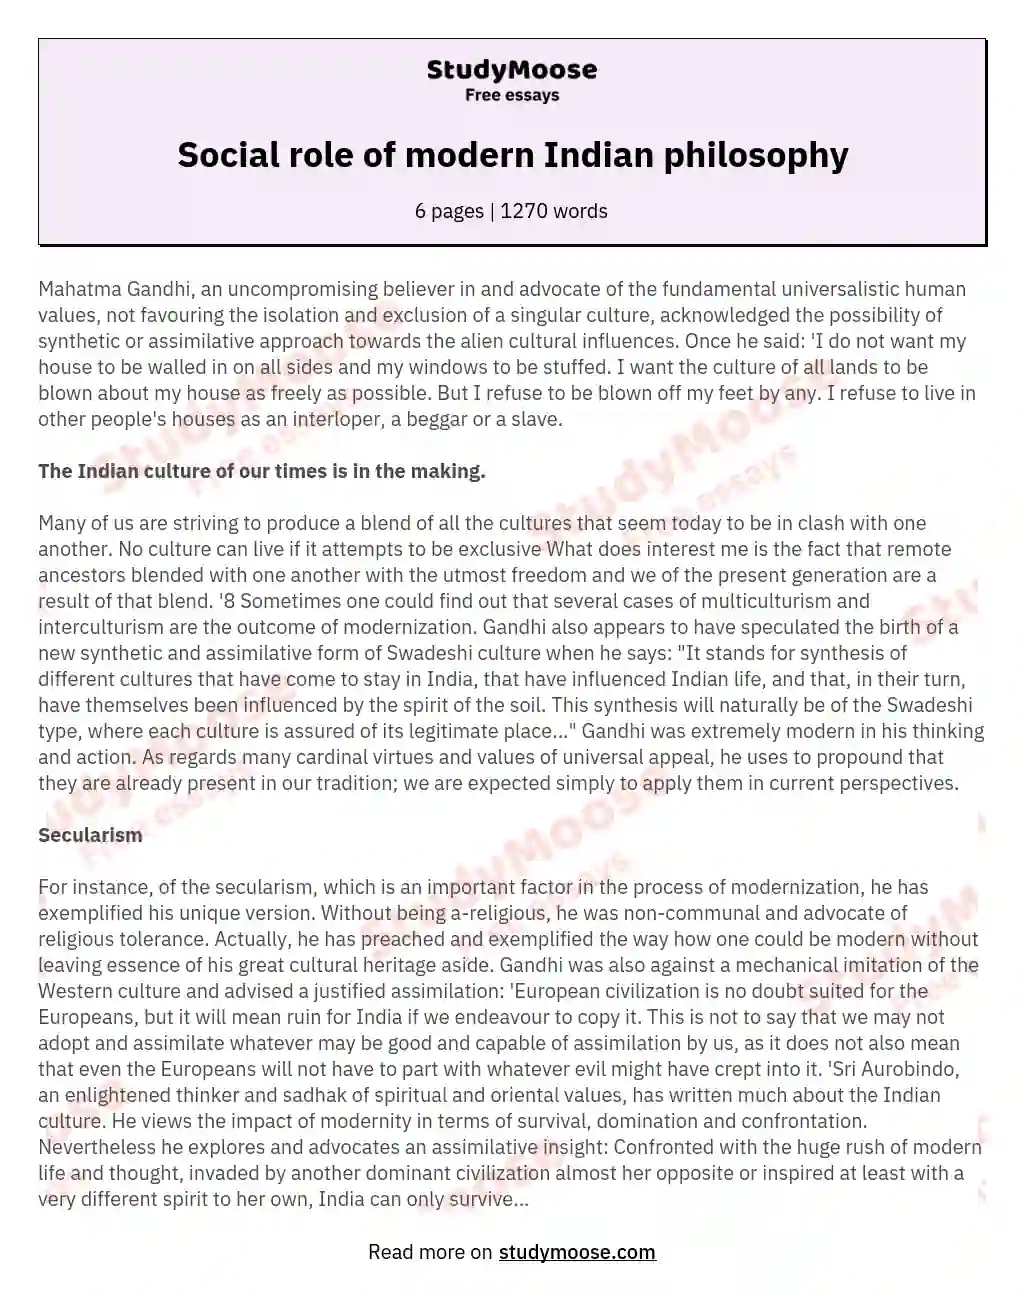 Social role of modern Indian philosophy